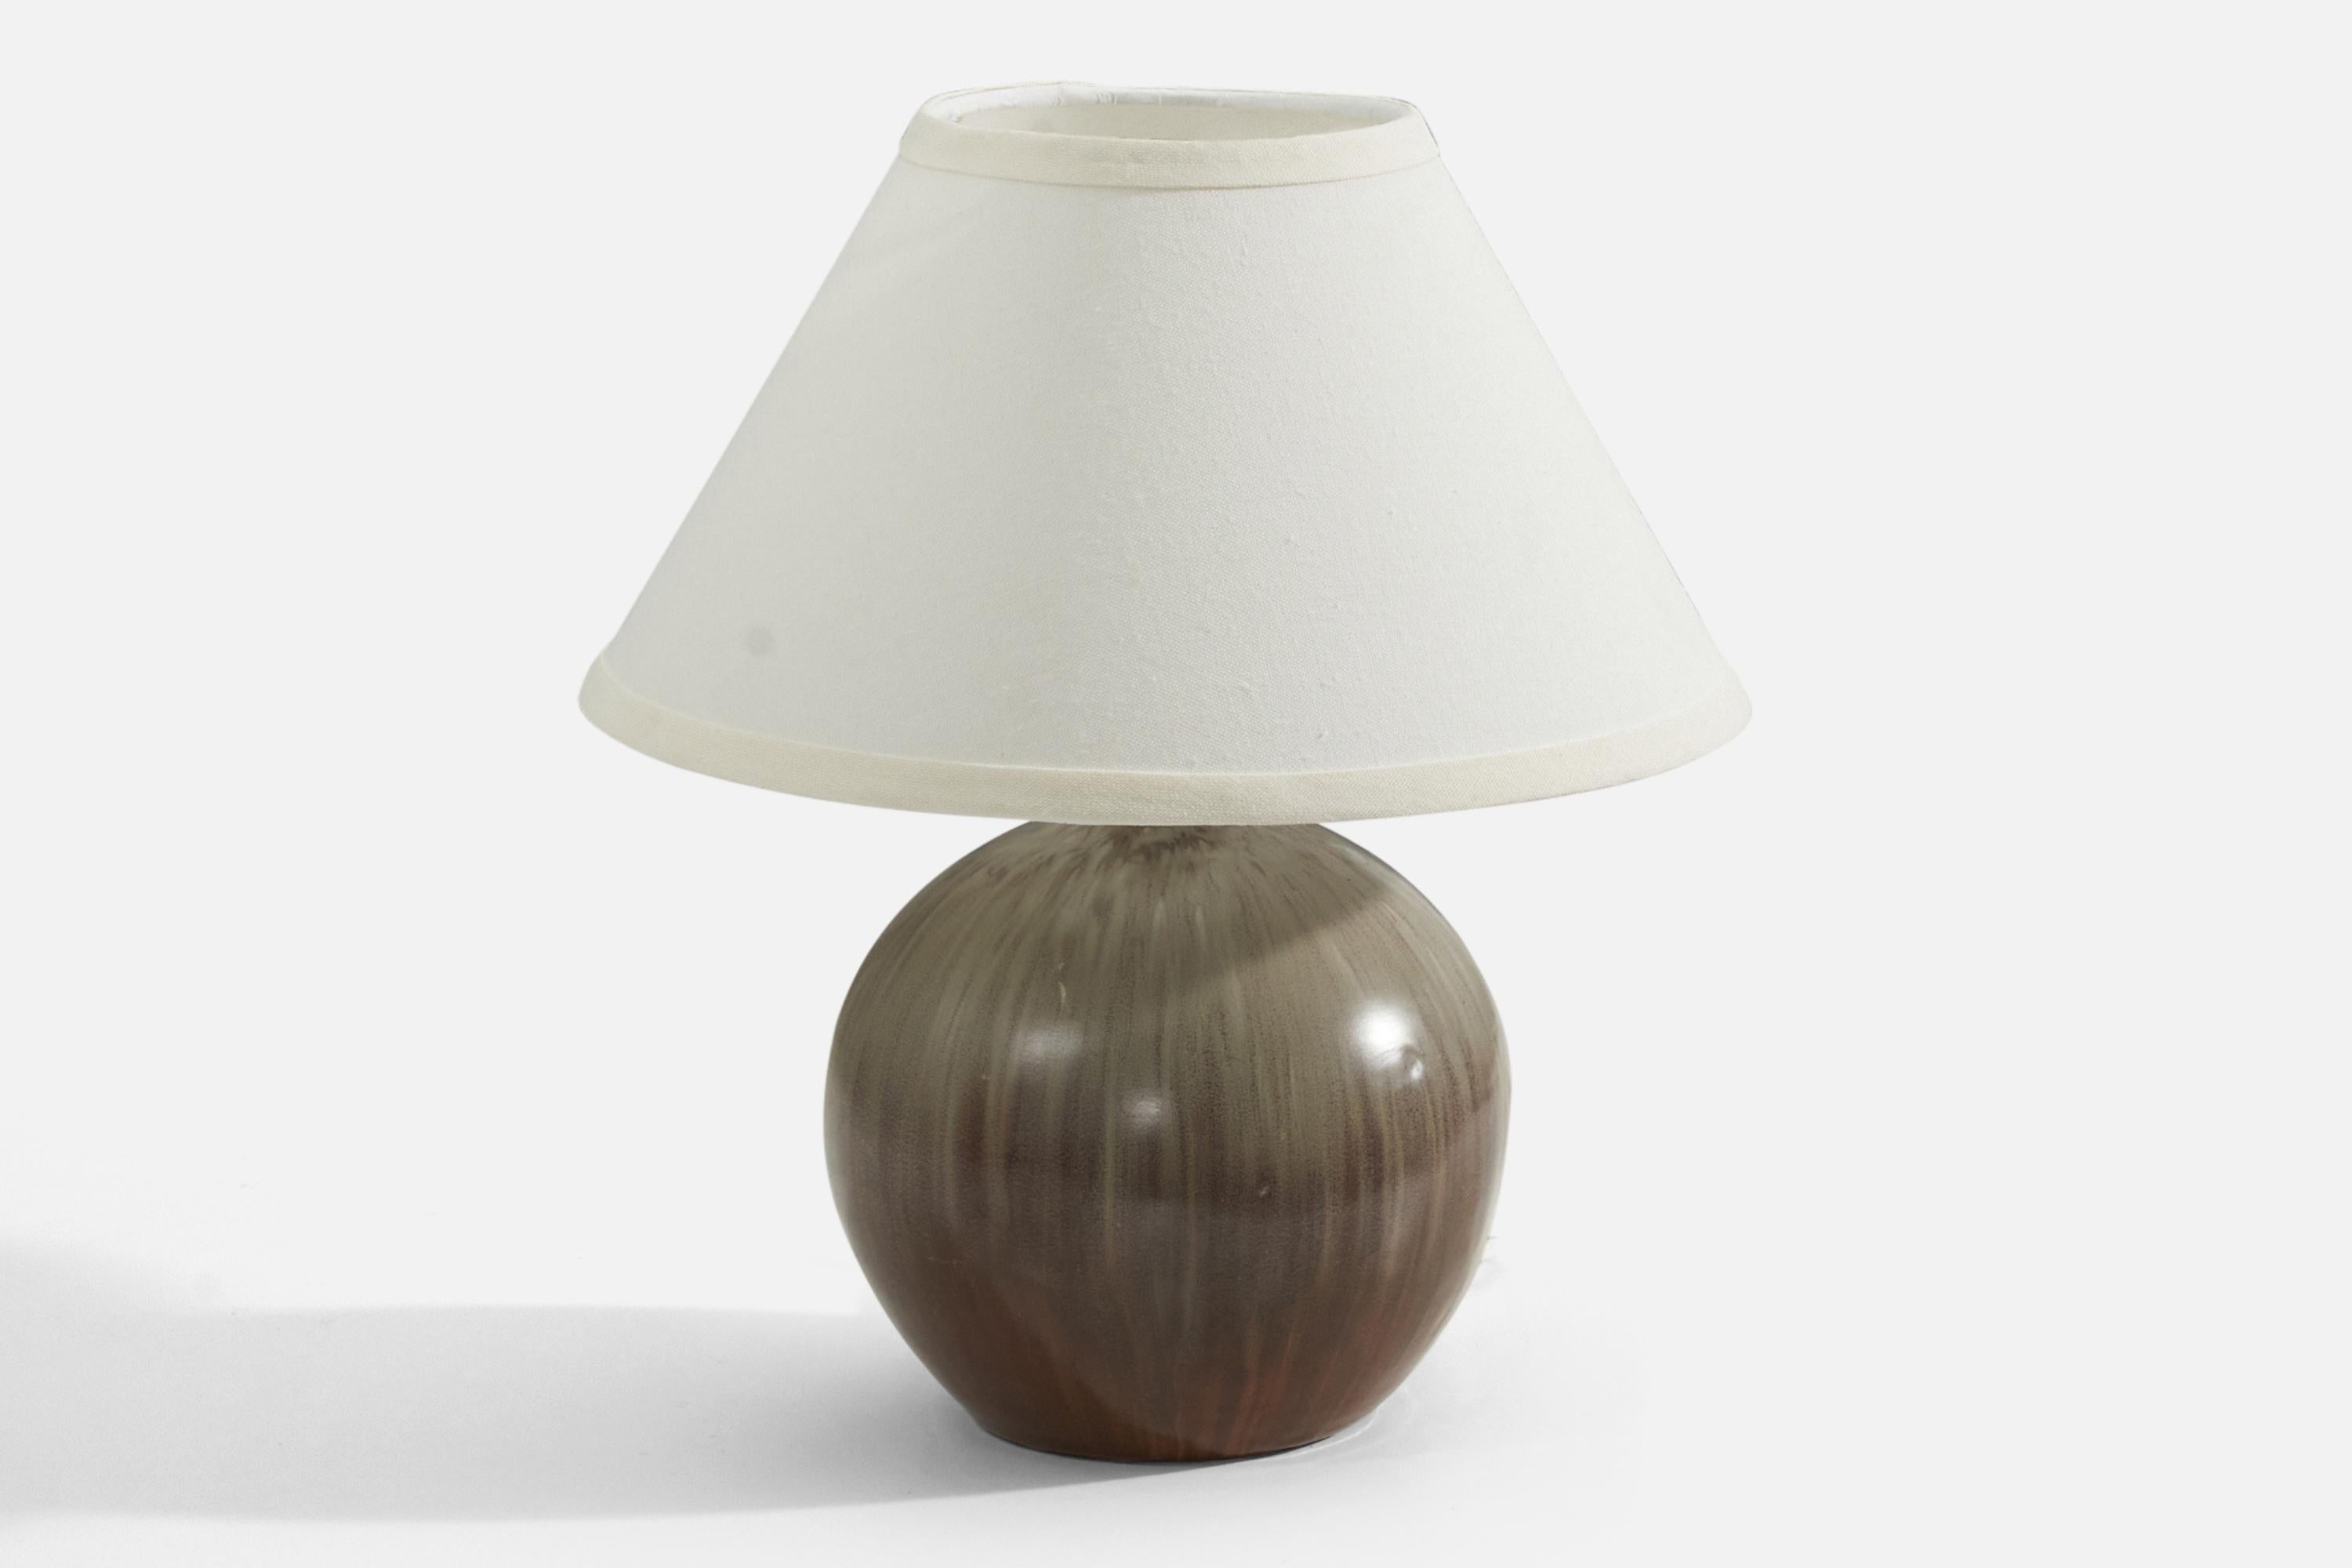 Danish Designer, Table Lamp, Grey and Brown-Glazed Stoneware, Denmark, 1940s In Good Condition For Sale In High Point, NC